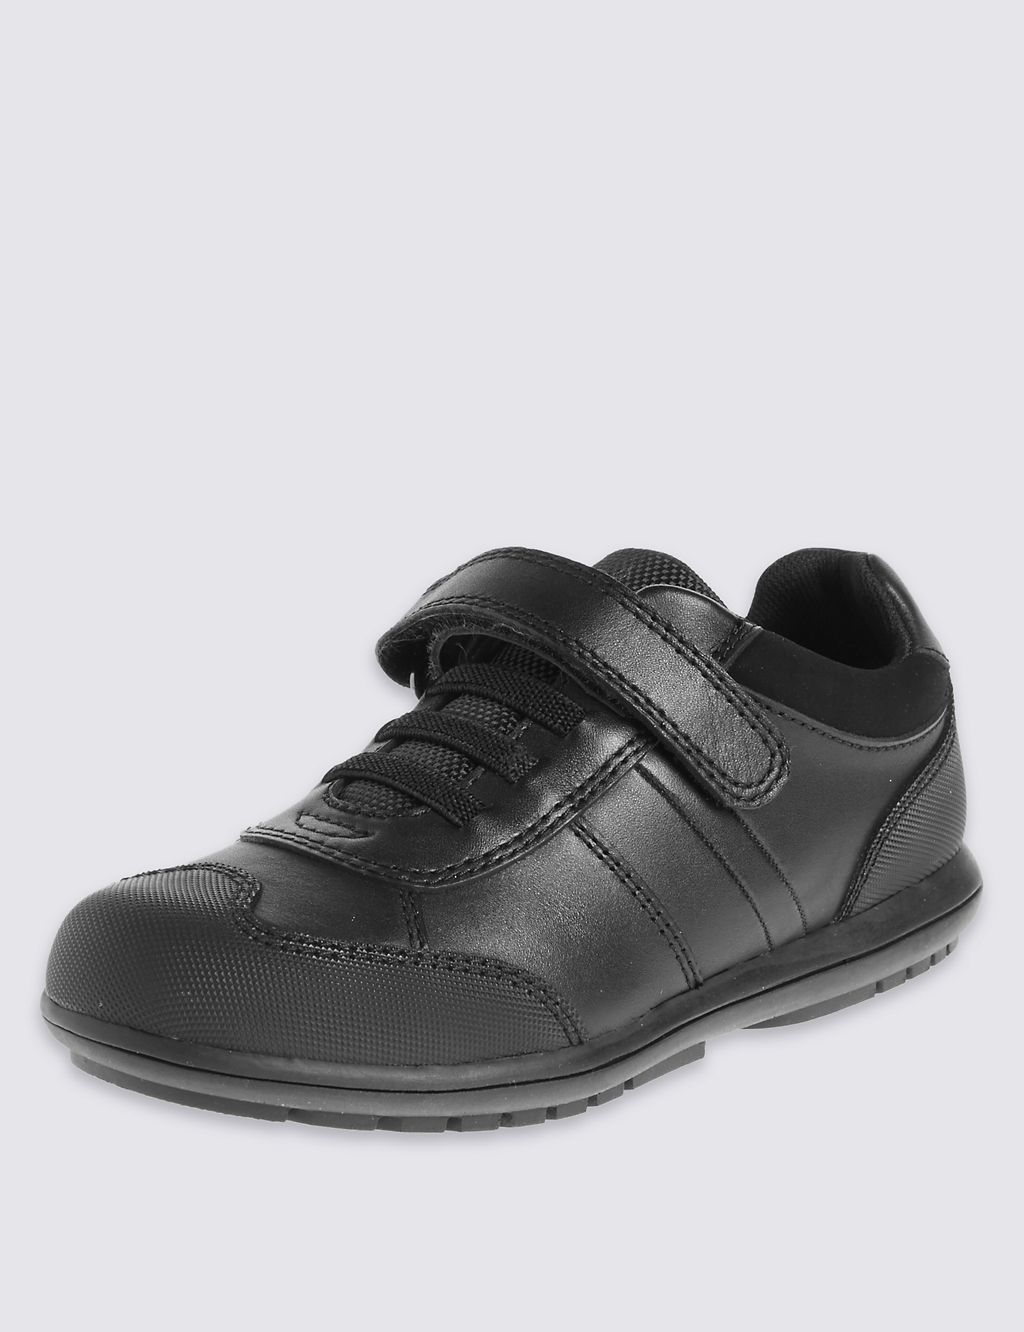 Kids' Leather School Shoes with Freshfeet™ Technology 3 of 3